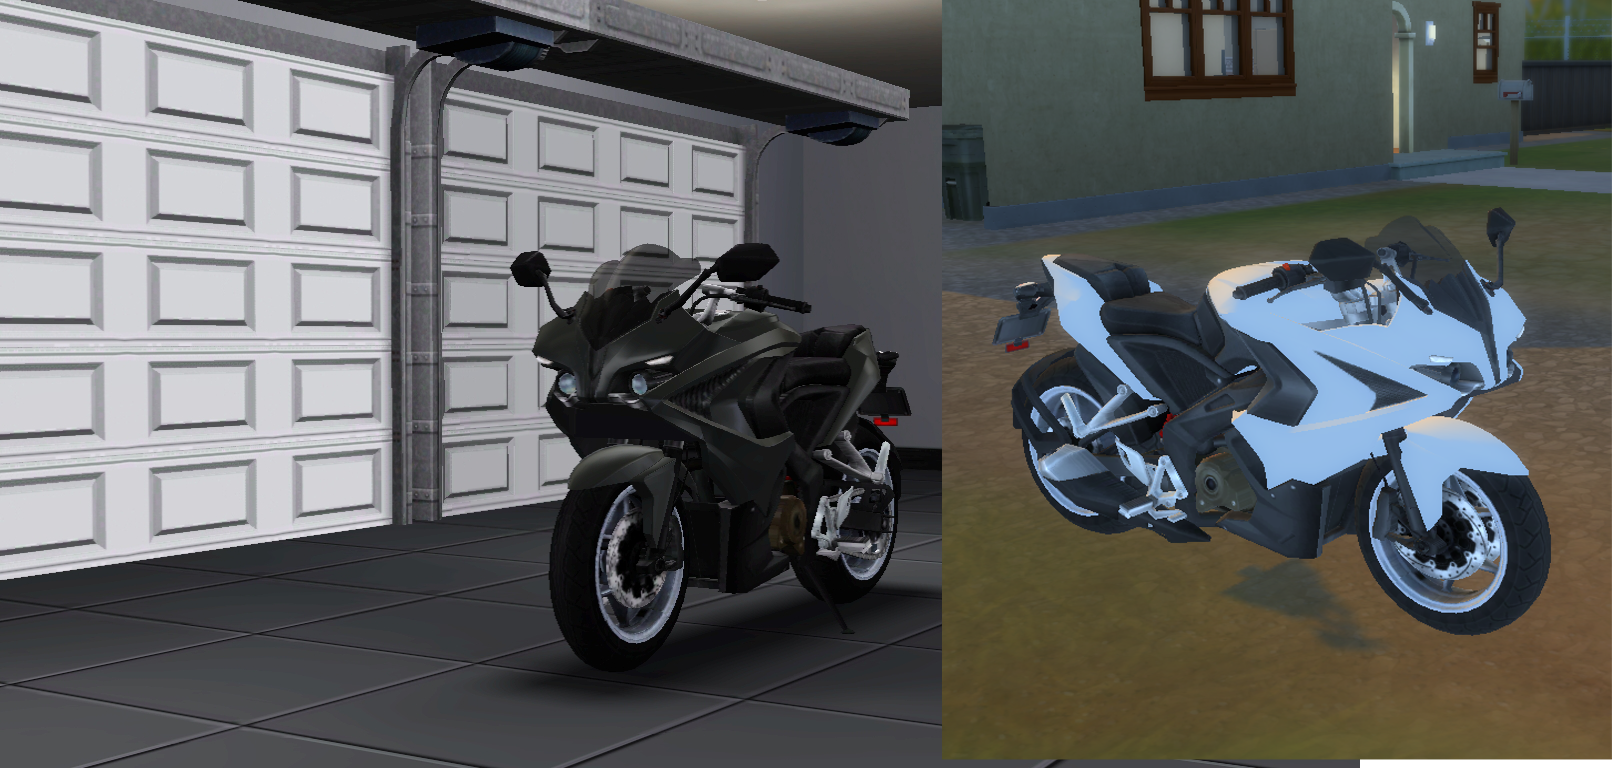 Bajaj Pulsar RS200 for the sims 3 and sims 4